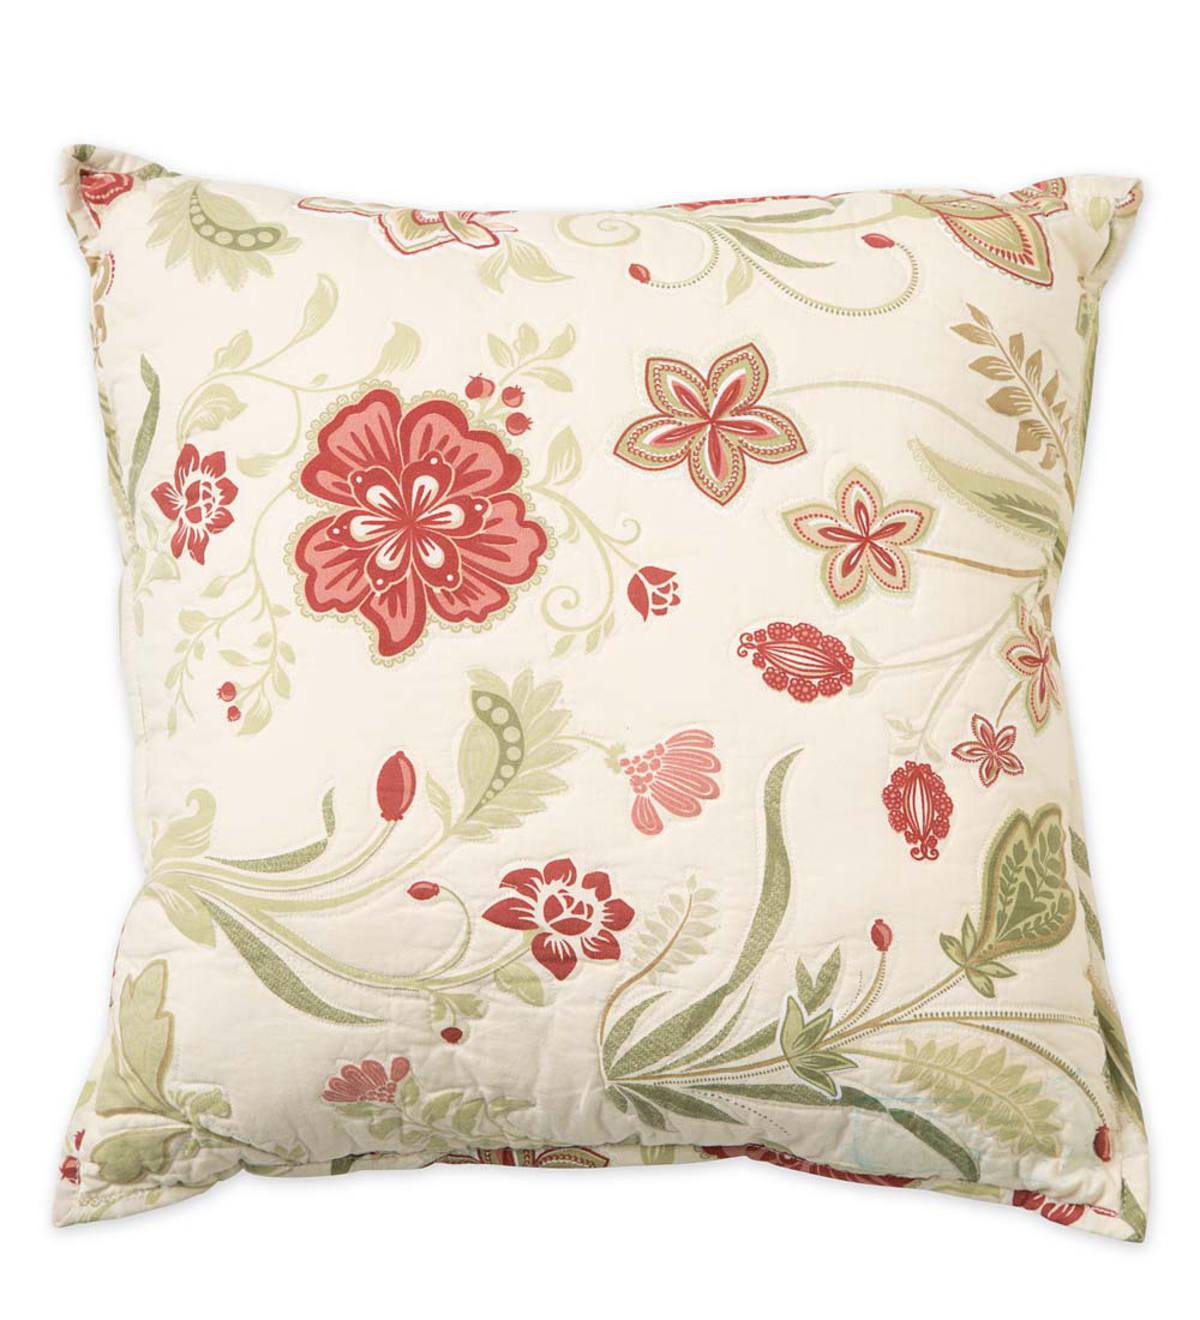 Jacobean Vine Quilted Throw Pillow, 16"sq.